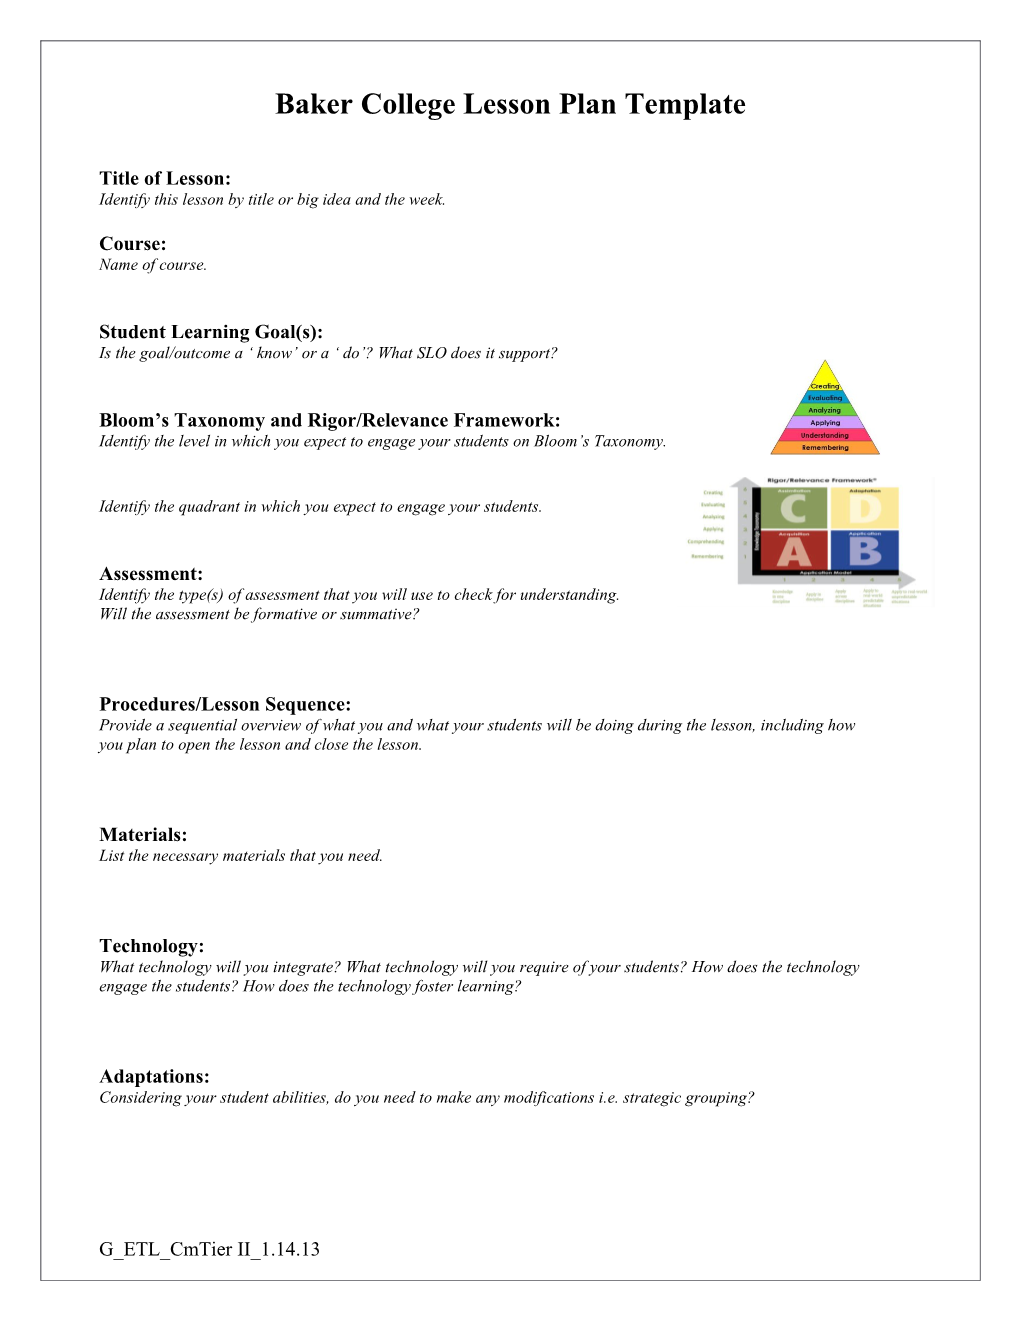 Lesson Plan Template s25